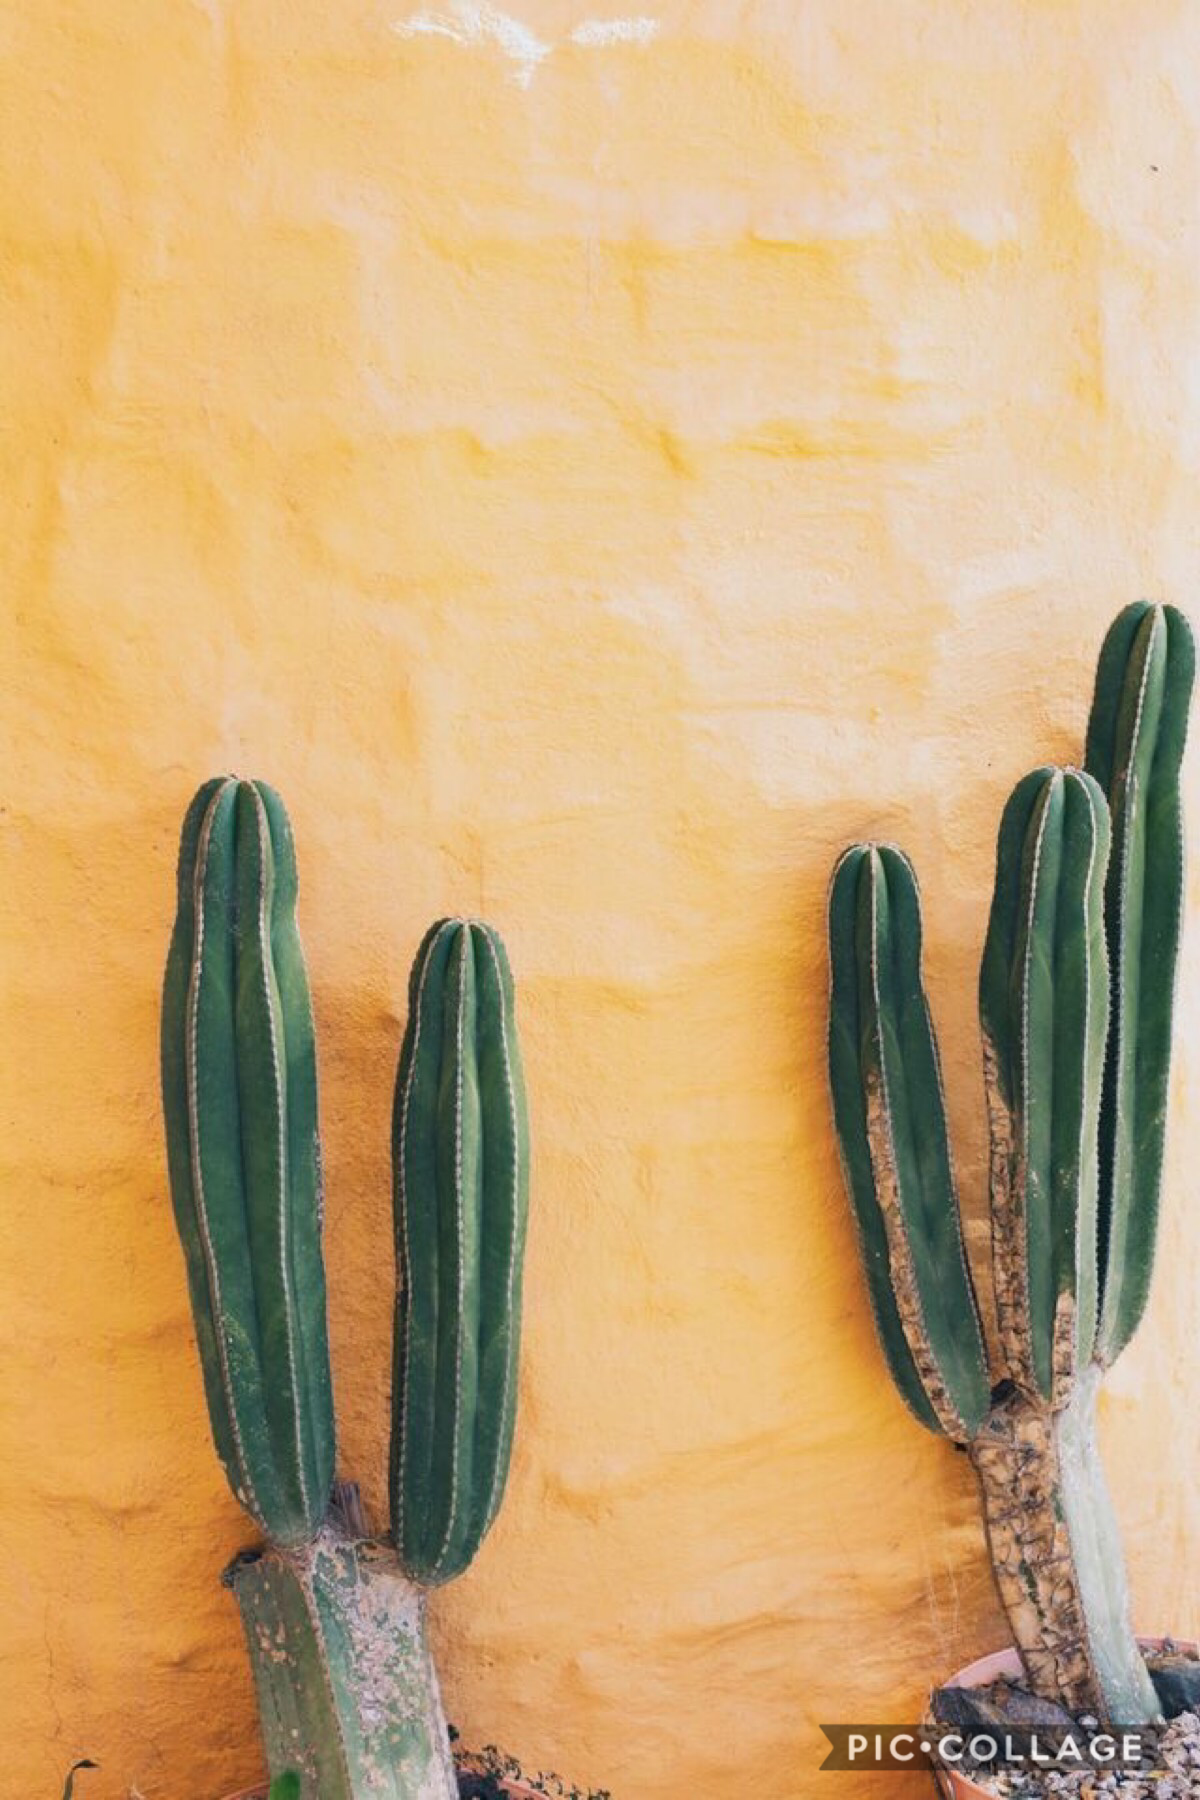 welcome back. 
this is my cactus theme. find more cactus pictures in the remixes. xx